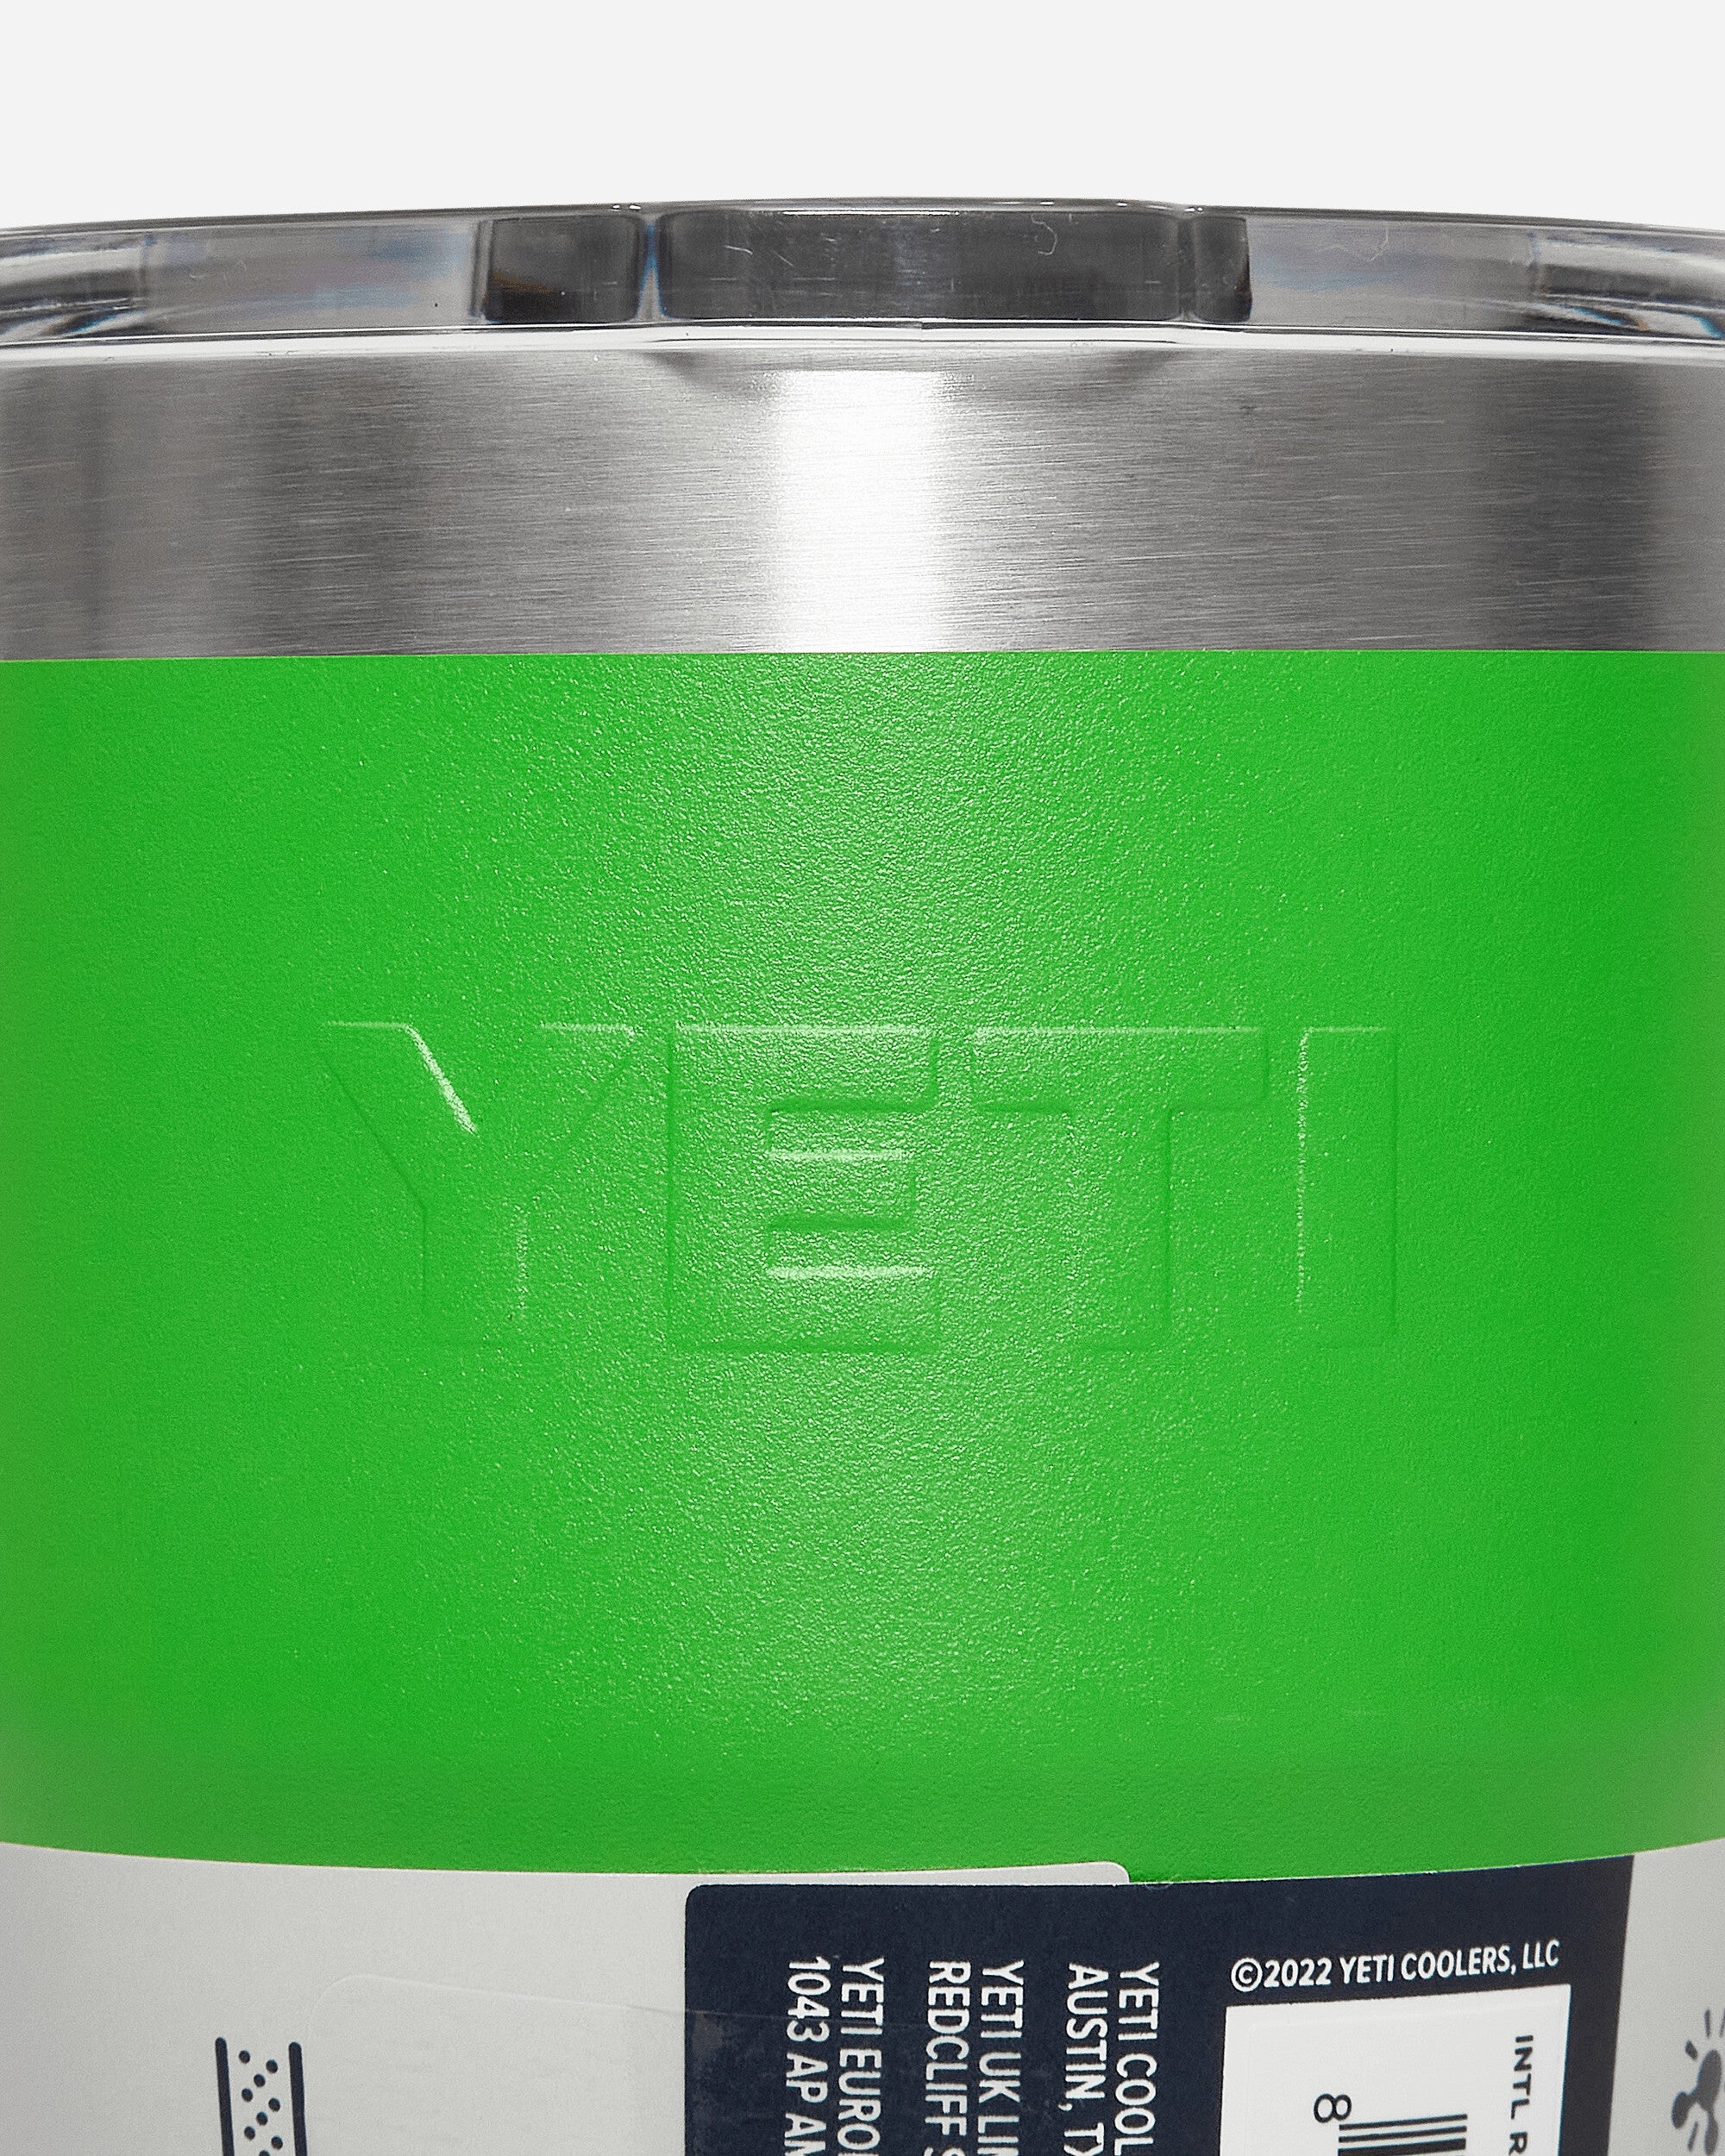 Yeti Single 16 Oz Stackable Cup Canopy Green Equipment Bottles and Bowls 0322 SPG